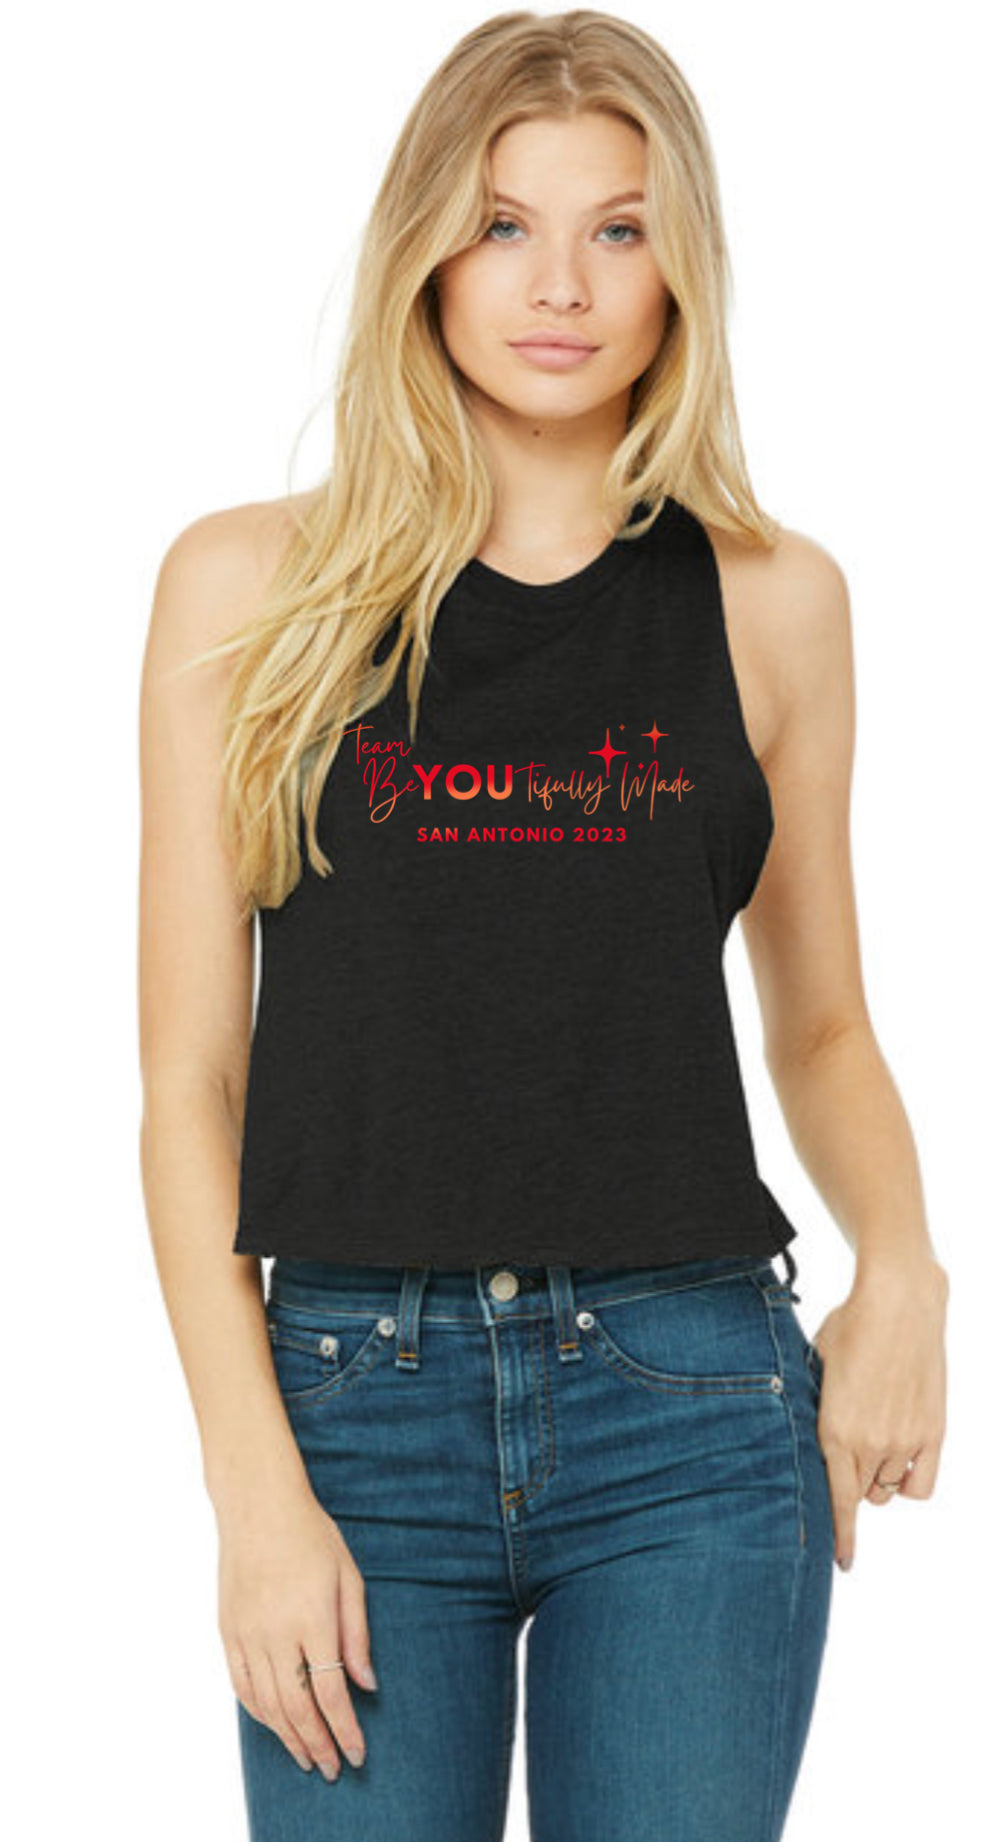 BeYOUTtifully Made & Anchored Empire Crop Tank